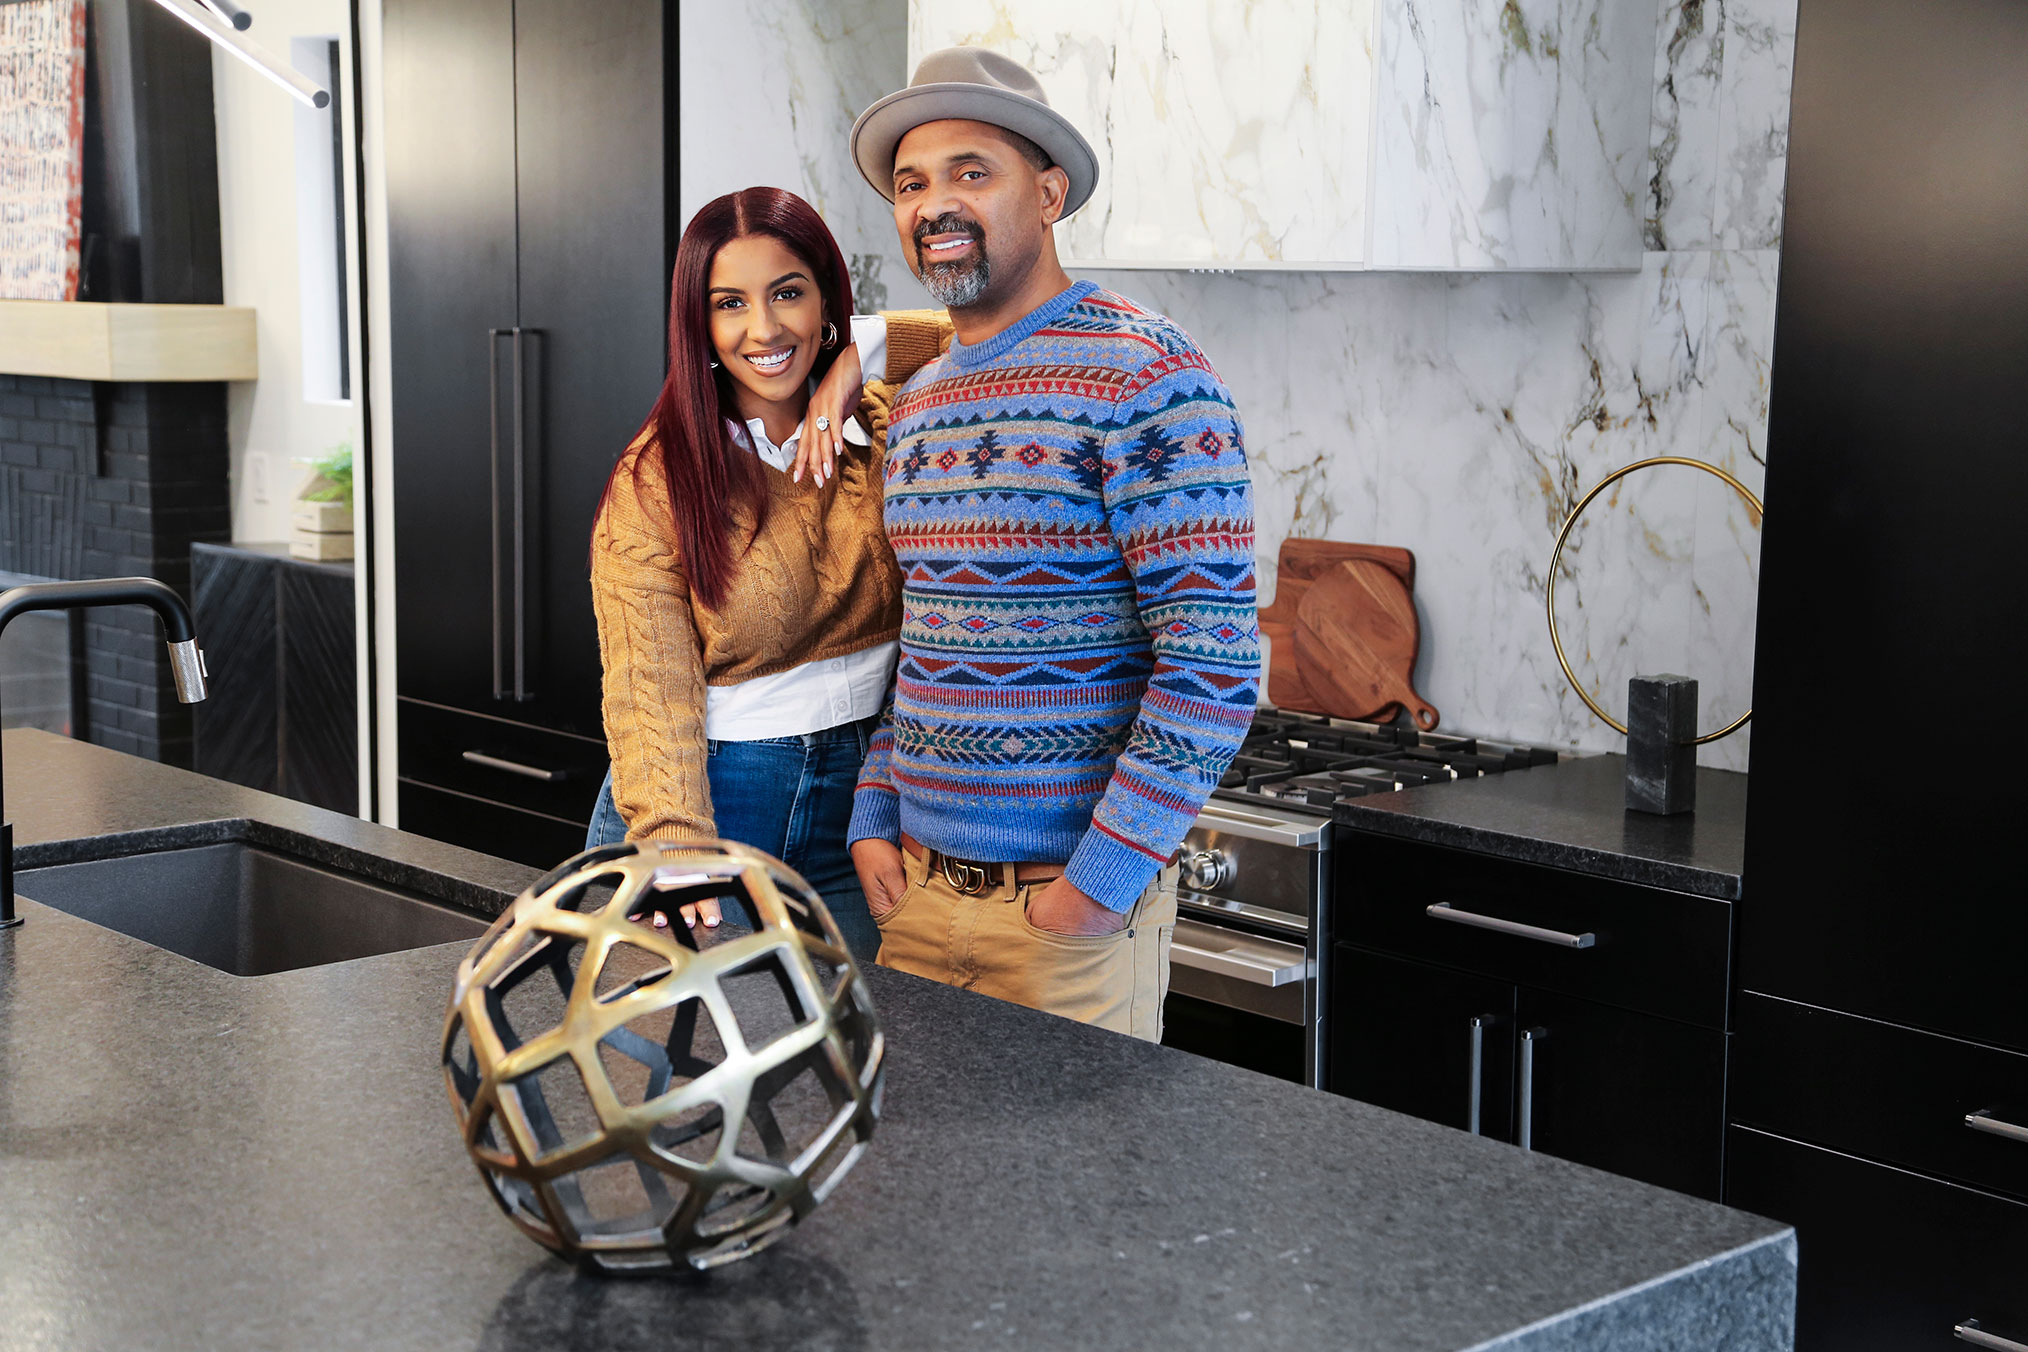 Mike Epps And Wife Kyra Announce New HGTV Series 'Buying Back The Block